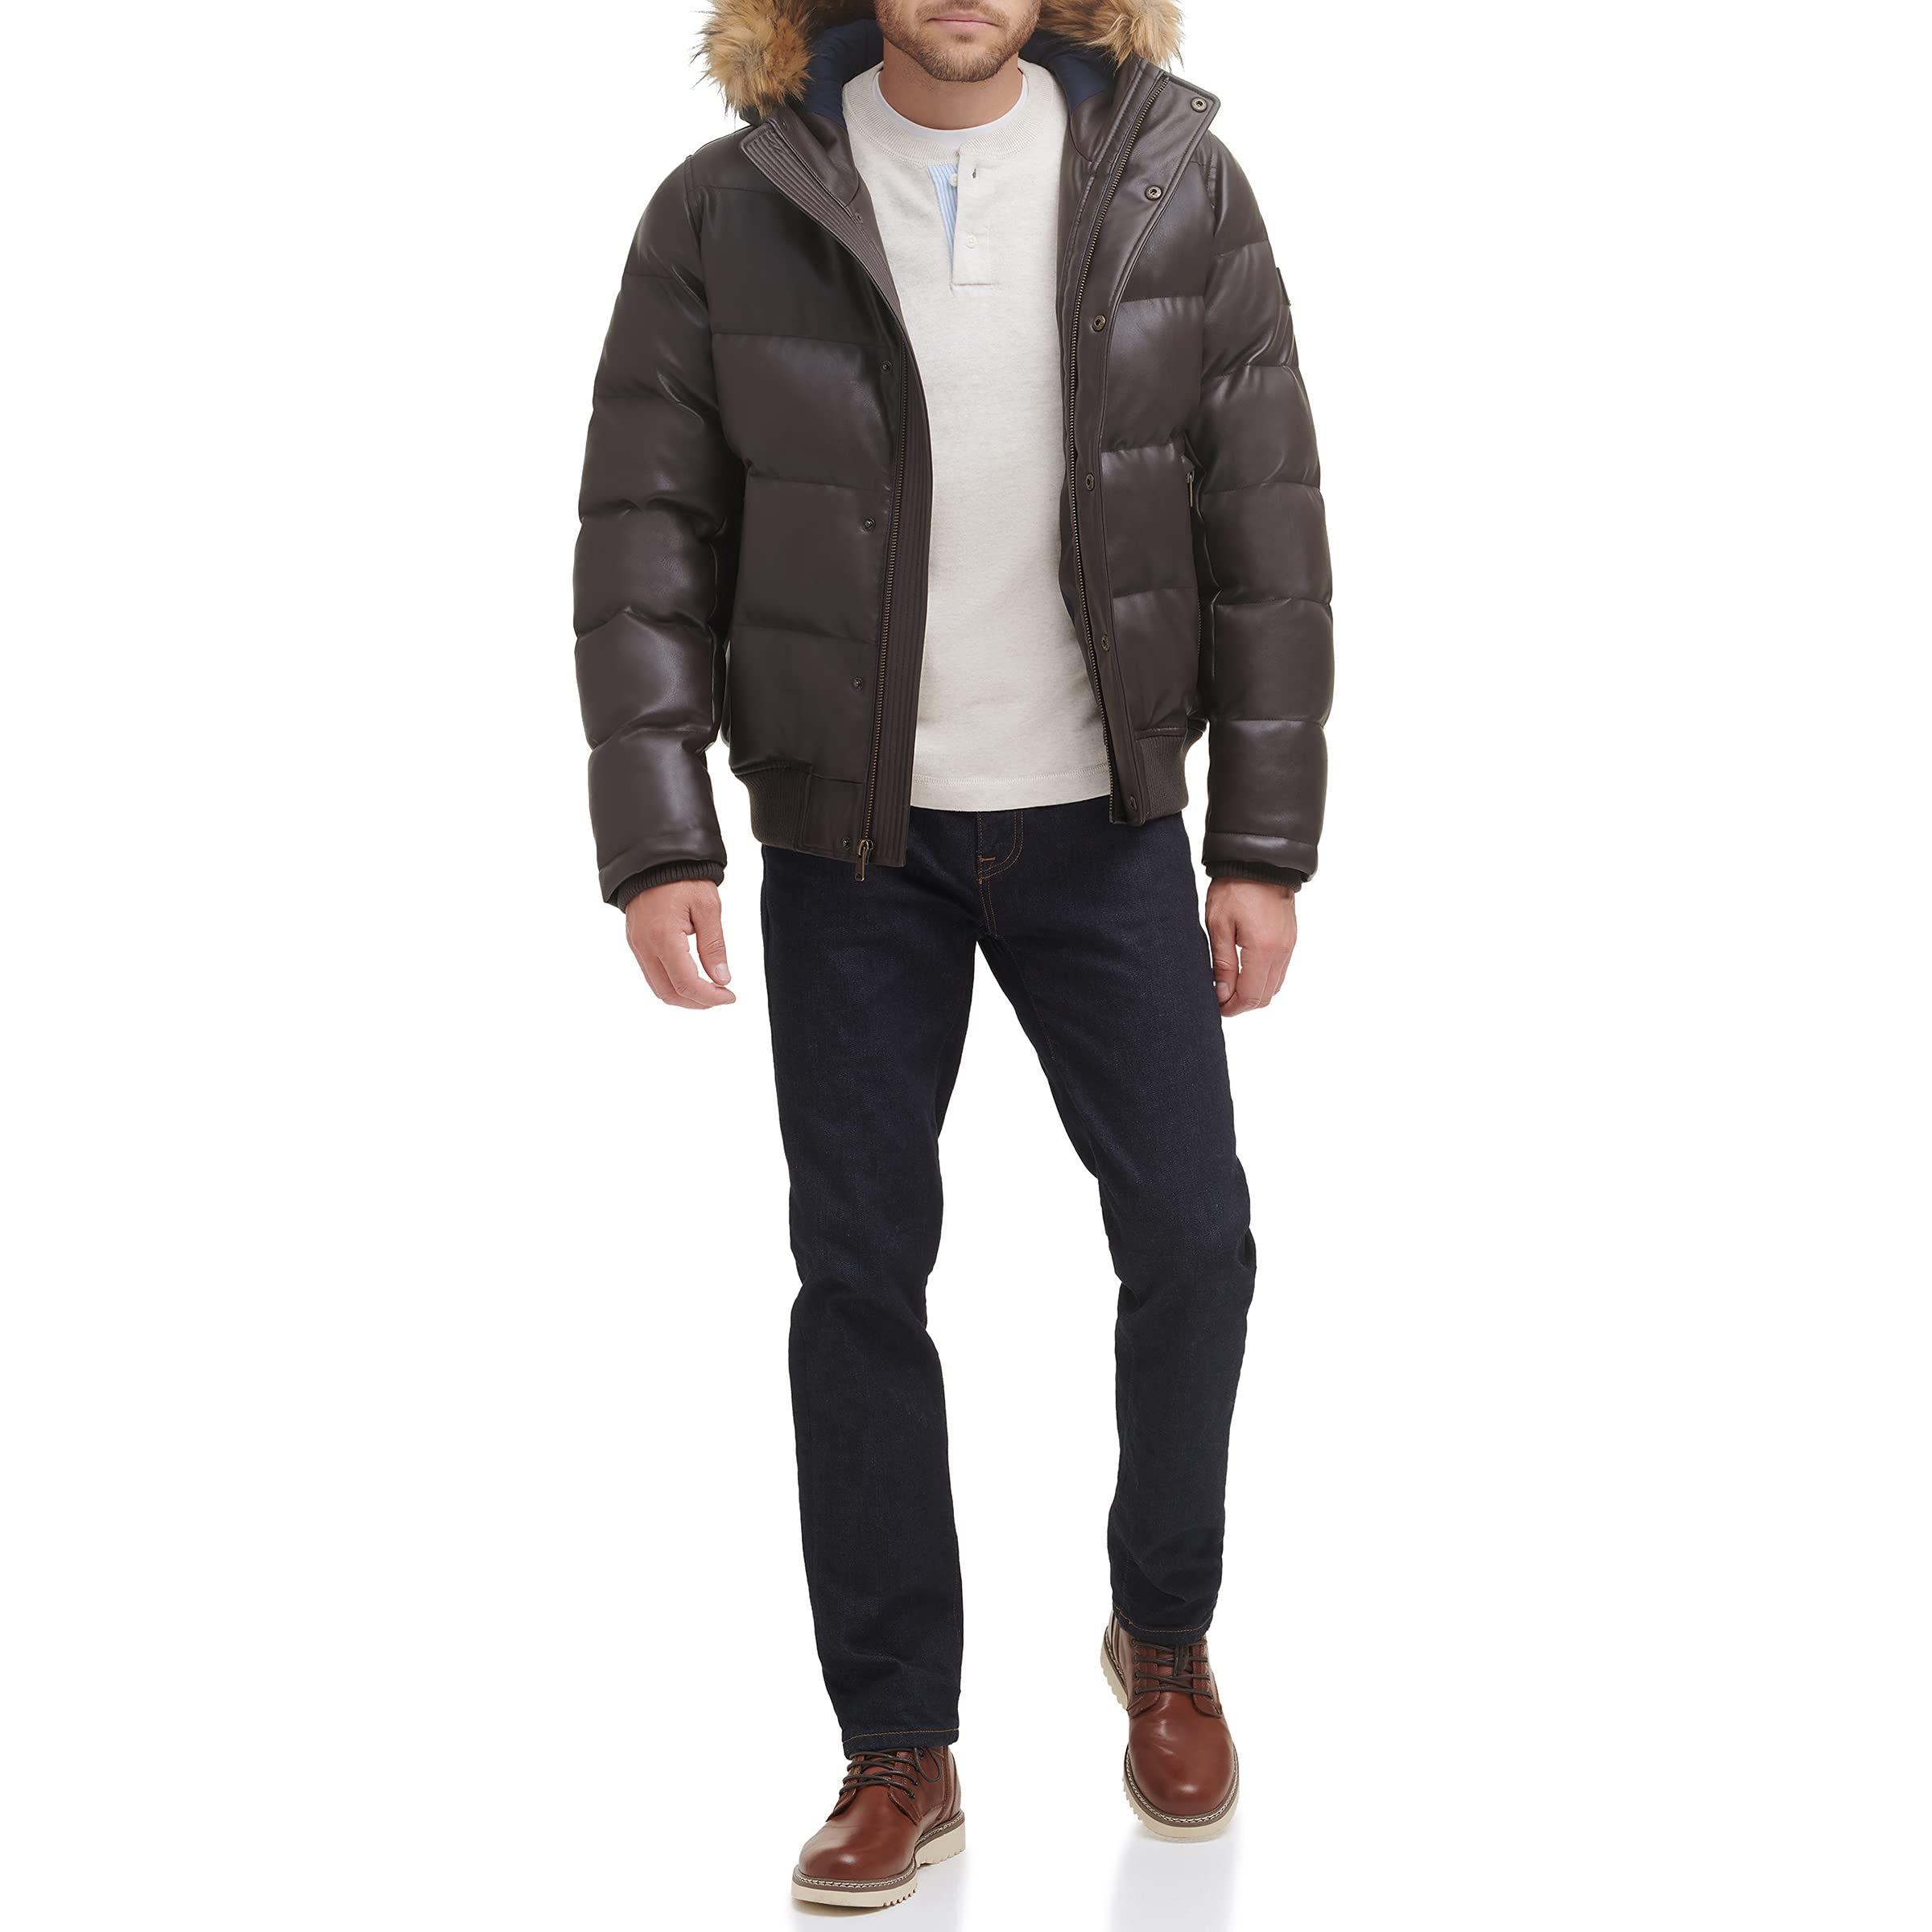 Tommy Hilfiger Men's Lightweight Quilted Faux Leather Puffer Jacket